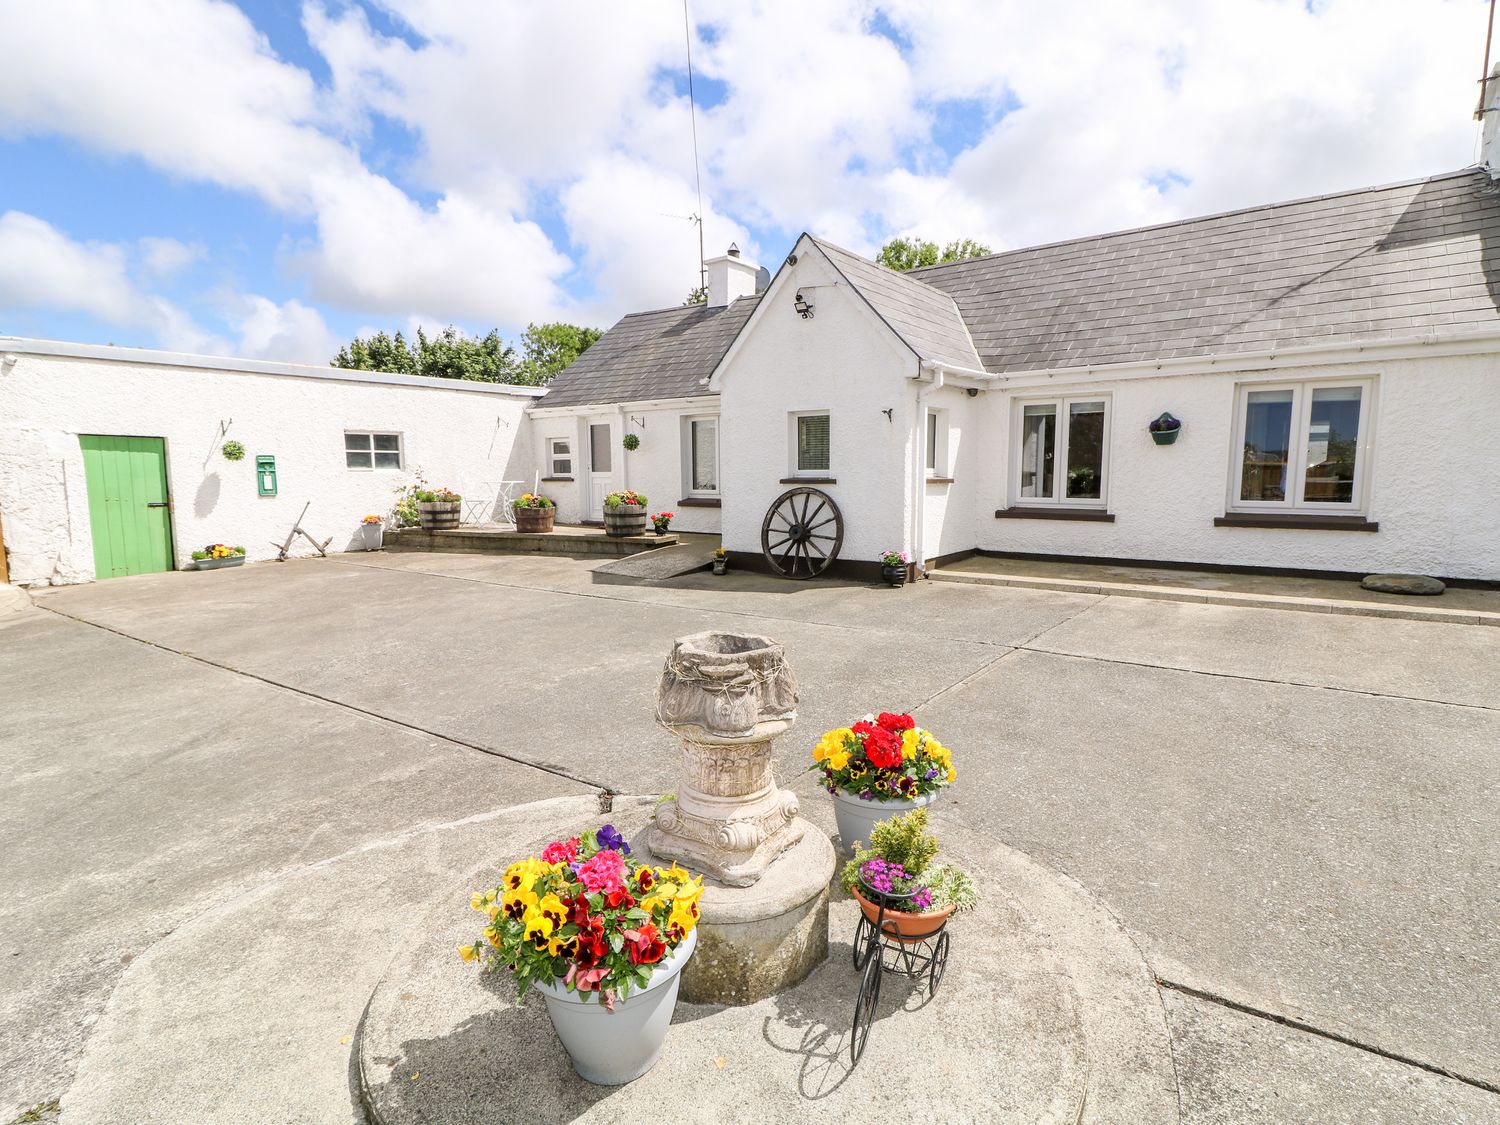 Whispering Willows - The Bungalow - County Donegal - 936116 - photo 1